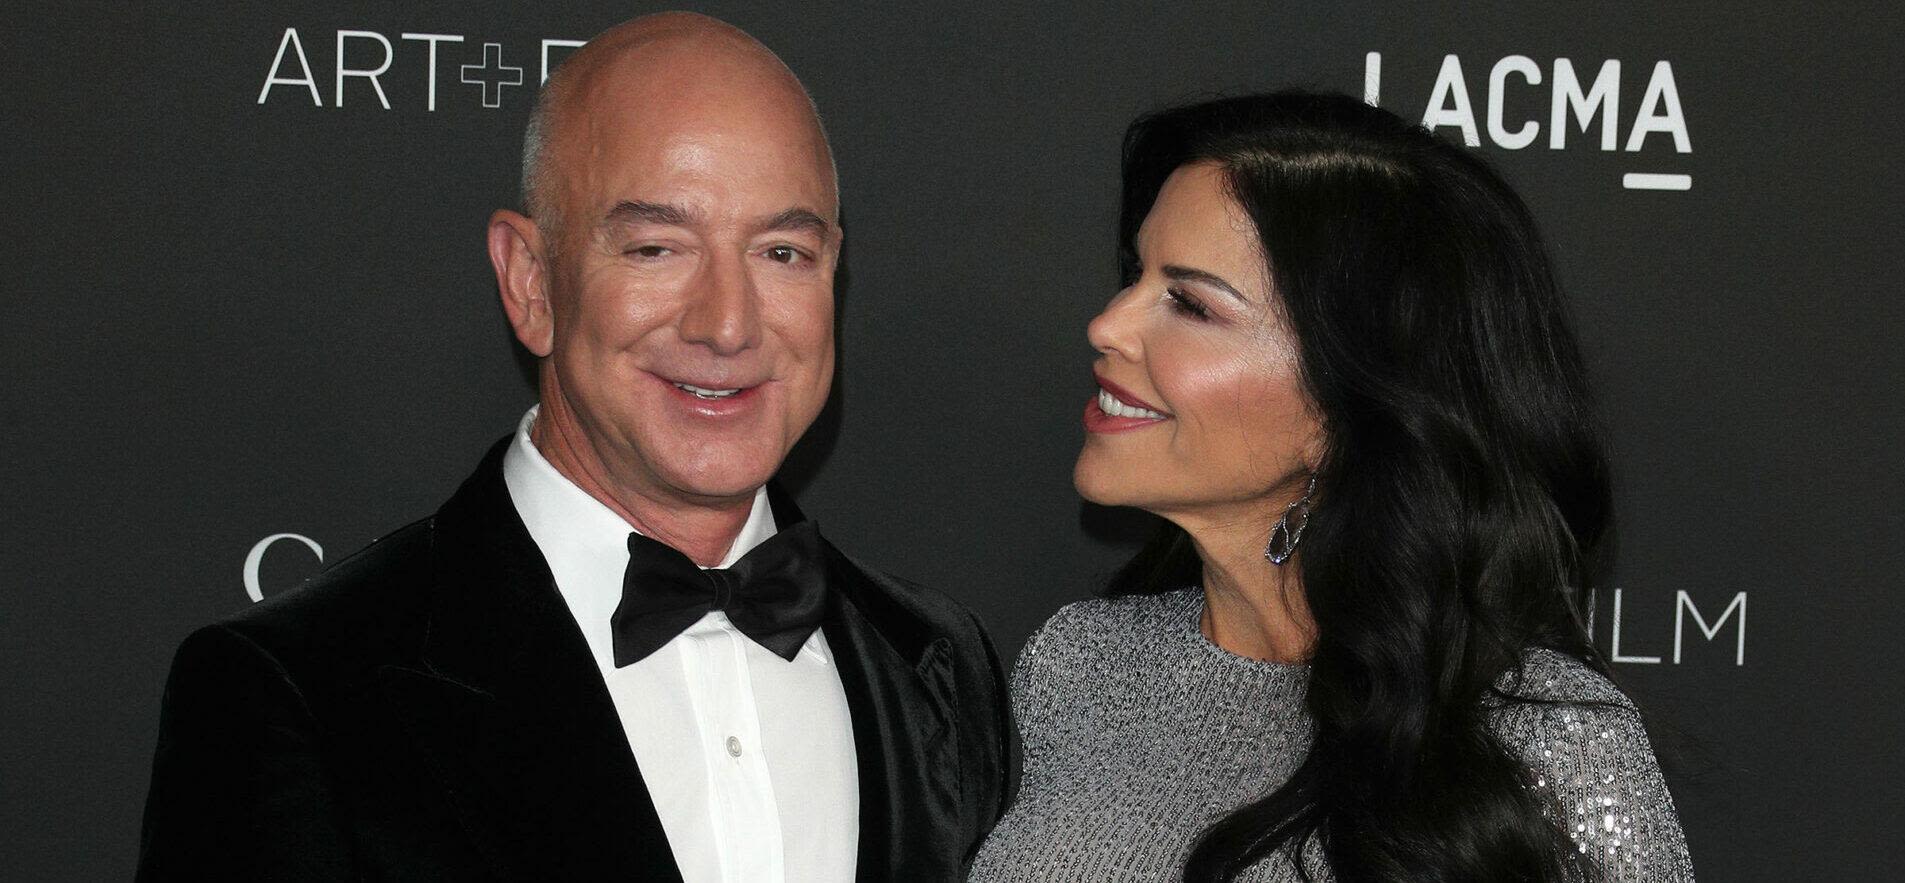 Lauren Sanchez And Jeff Bezos Look Loved Up At 'Summer Camp For Billionaires' In Idaho